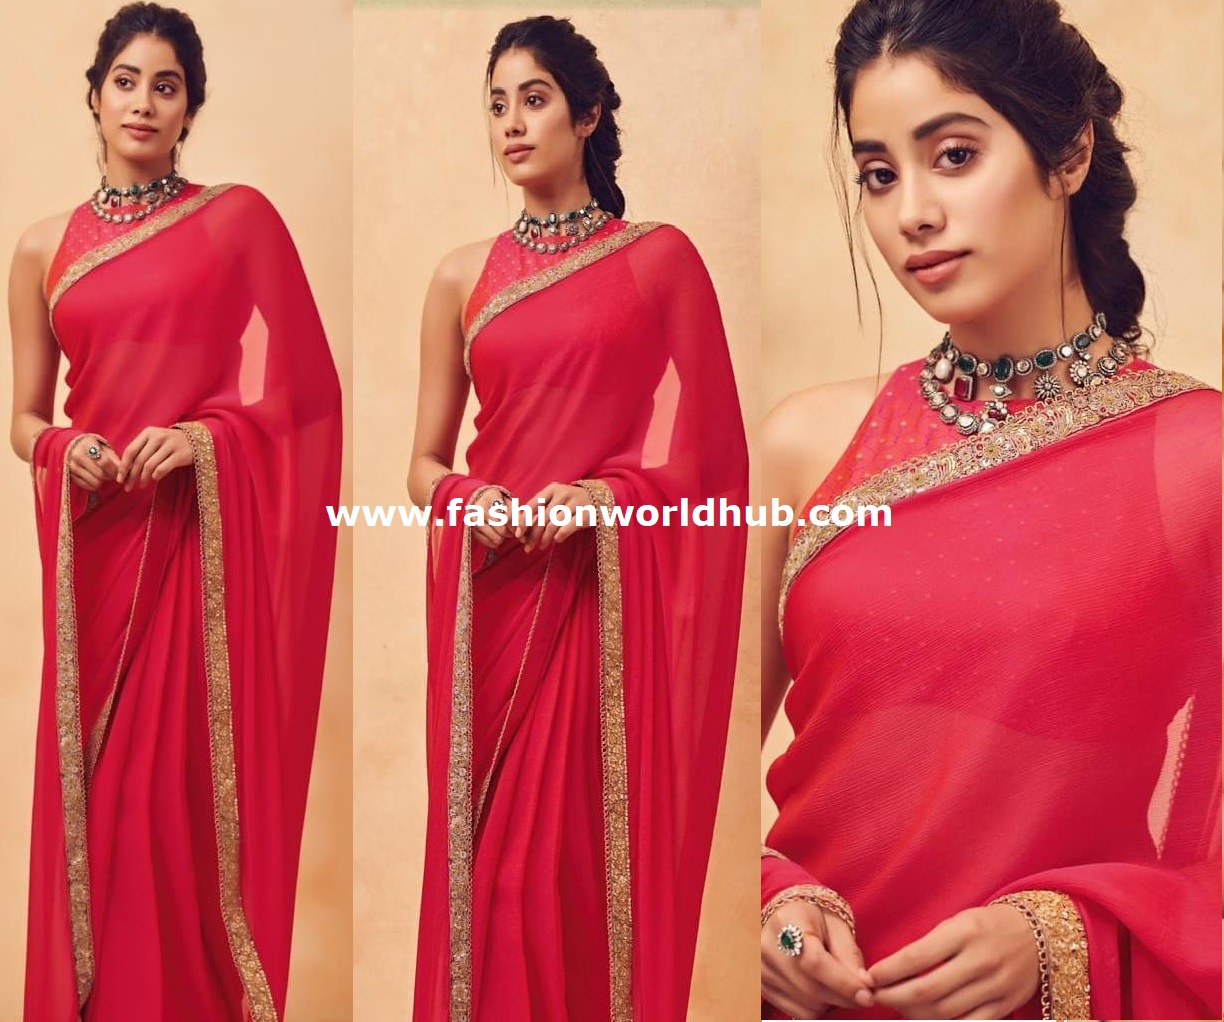 Janhvi Kapoor looked hot in a red saree at the trailer launch of Mili Photo